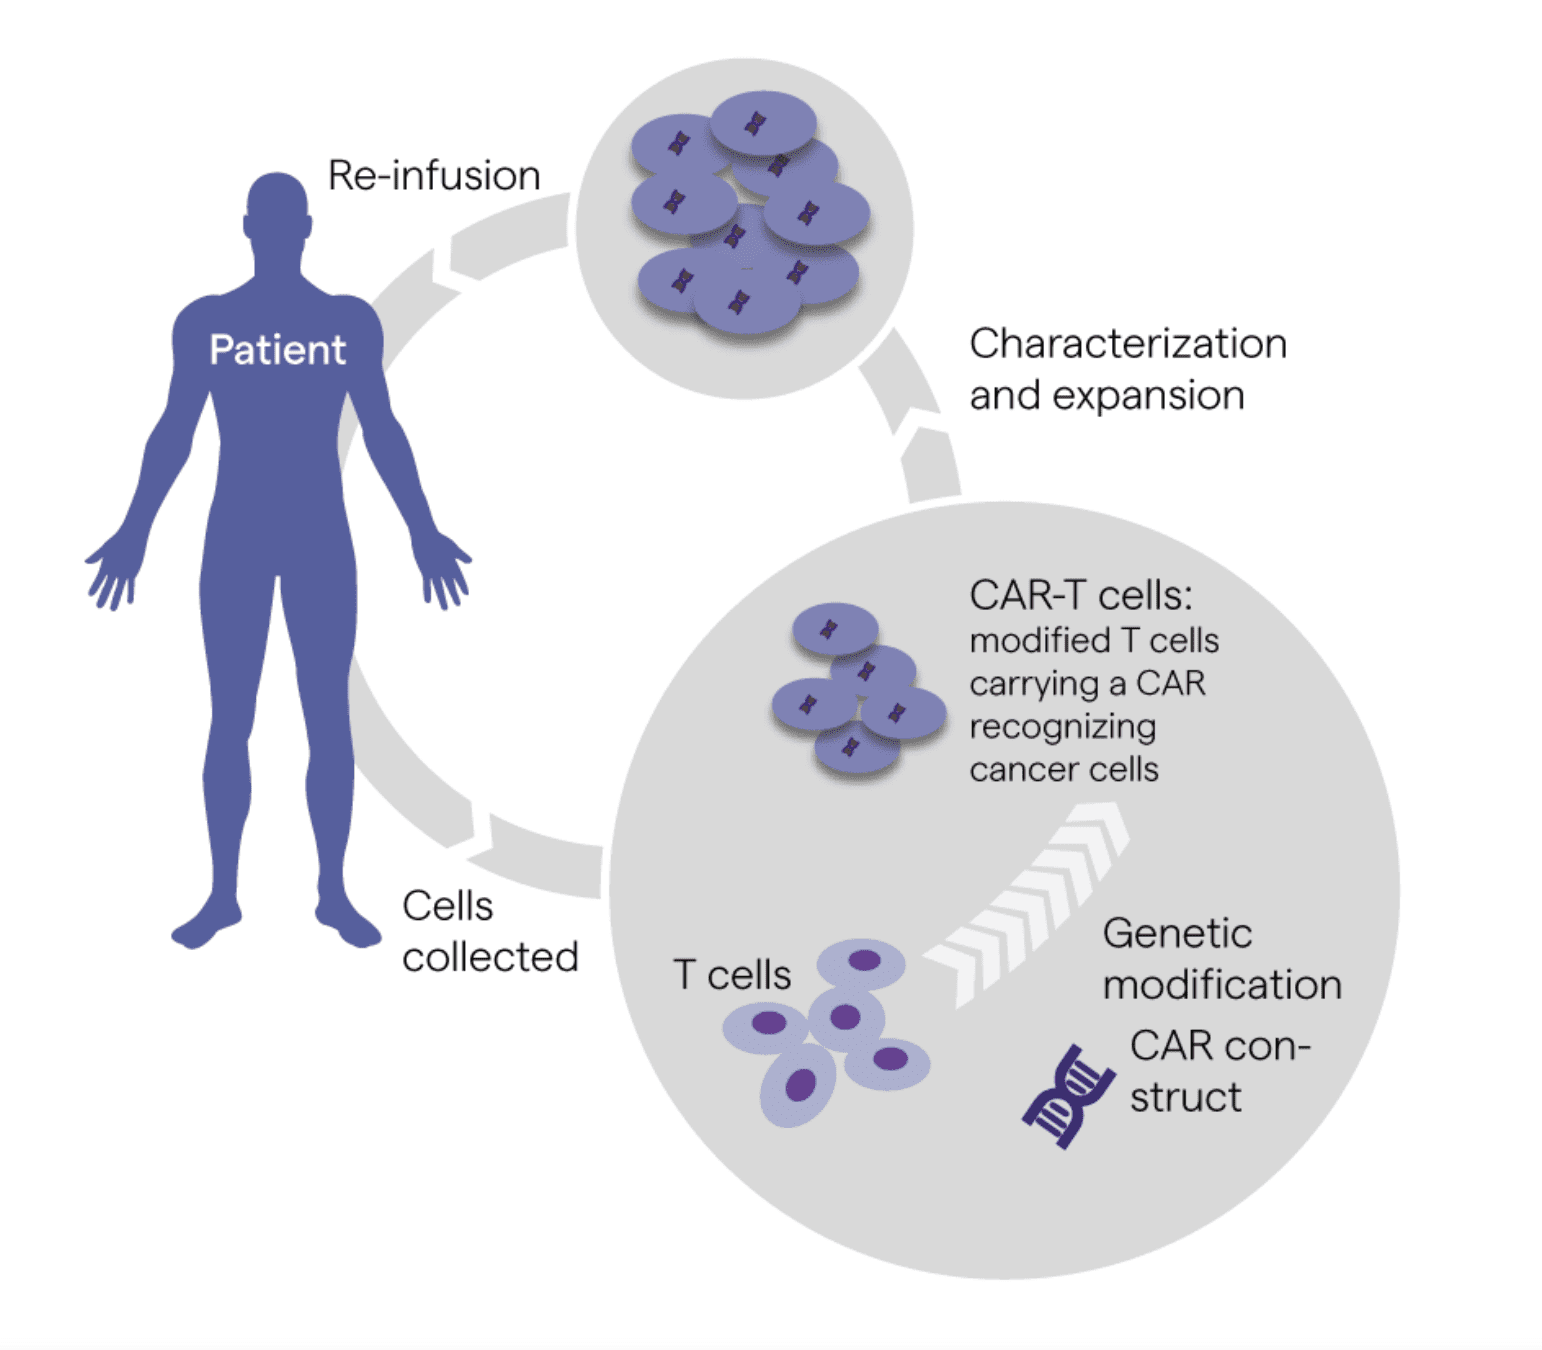 Gene modification through cell and gene therapy.